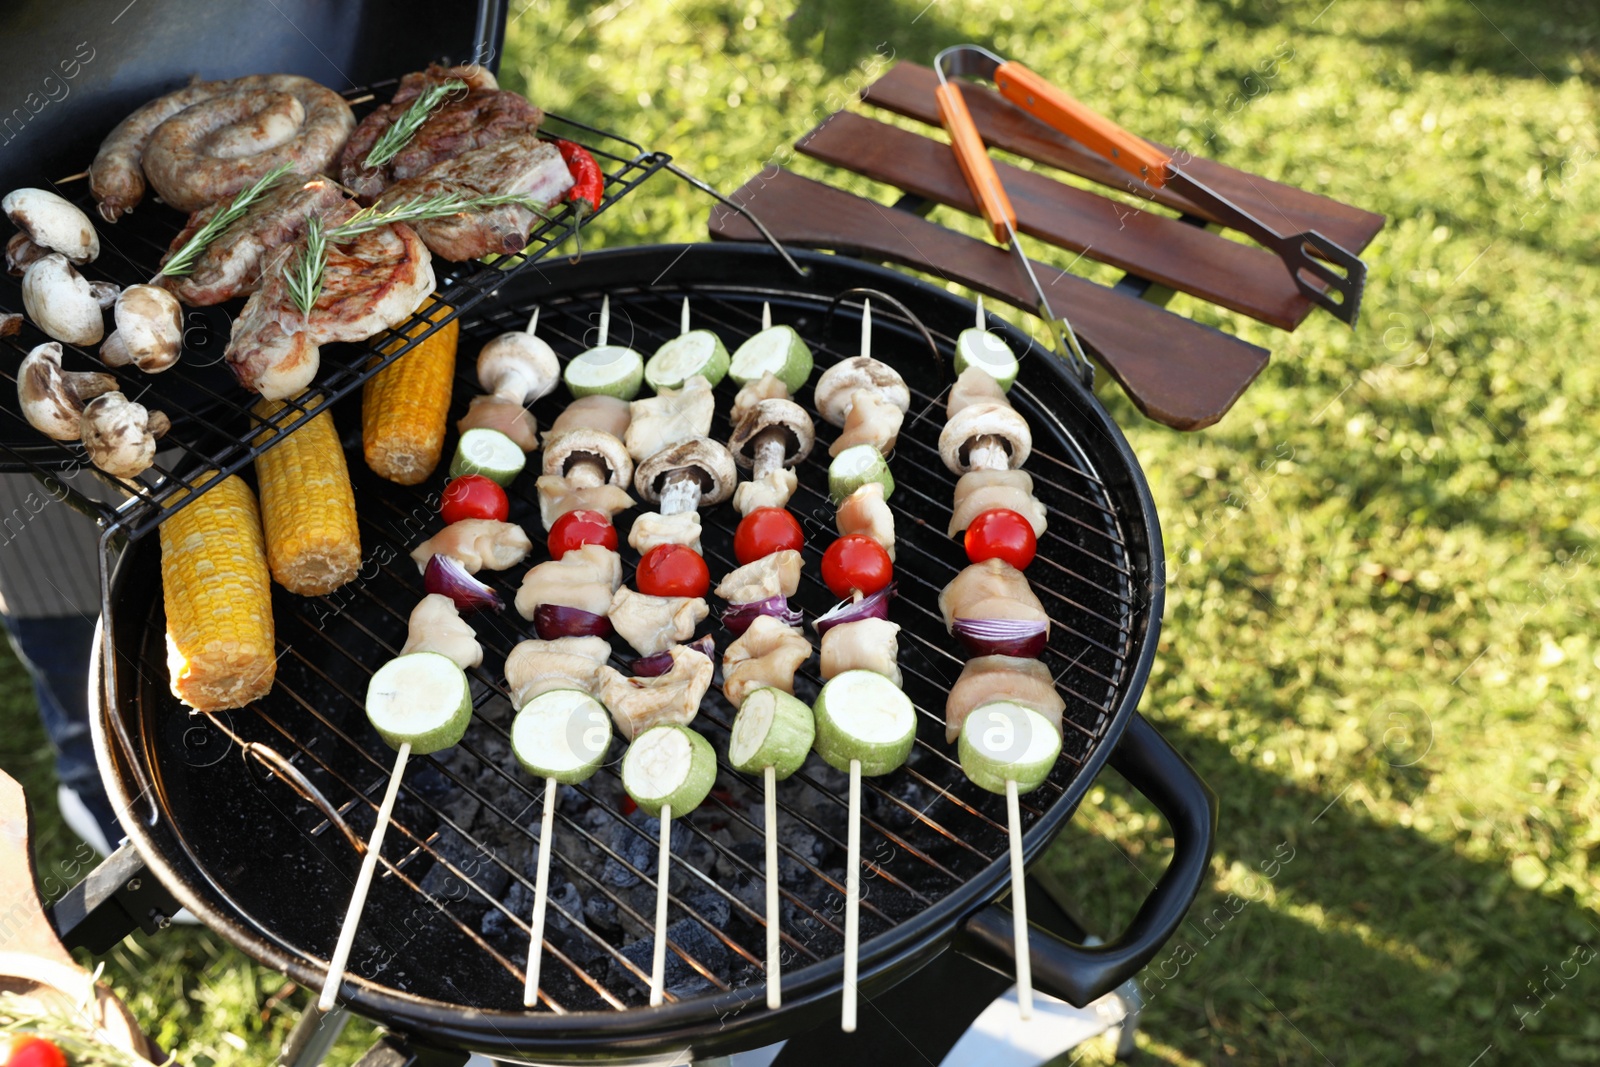 Photo of Cooking meat and vegetables on barbecue grill outdoors